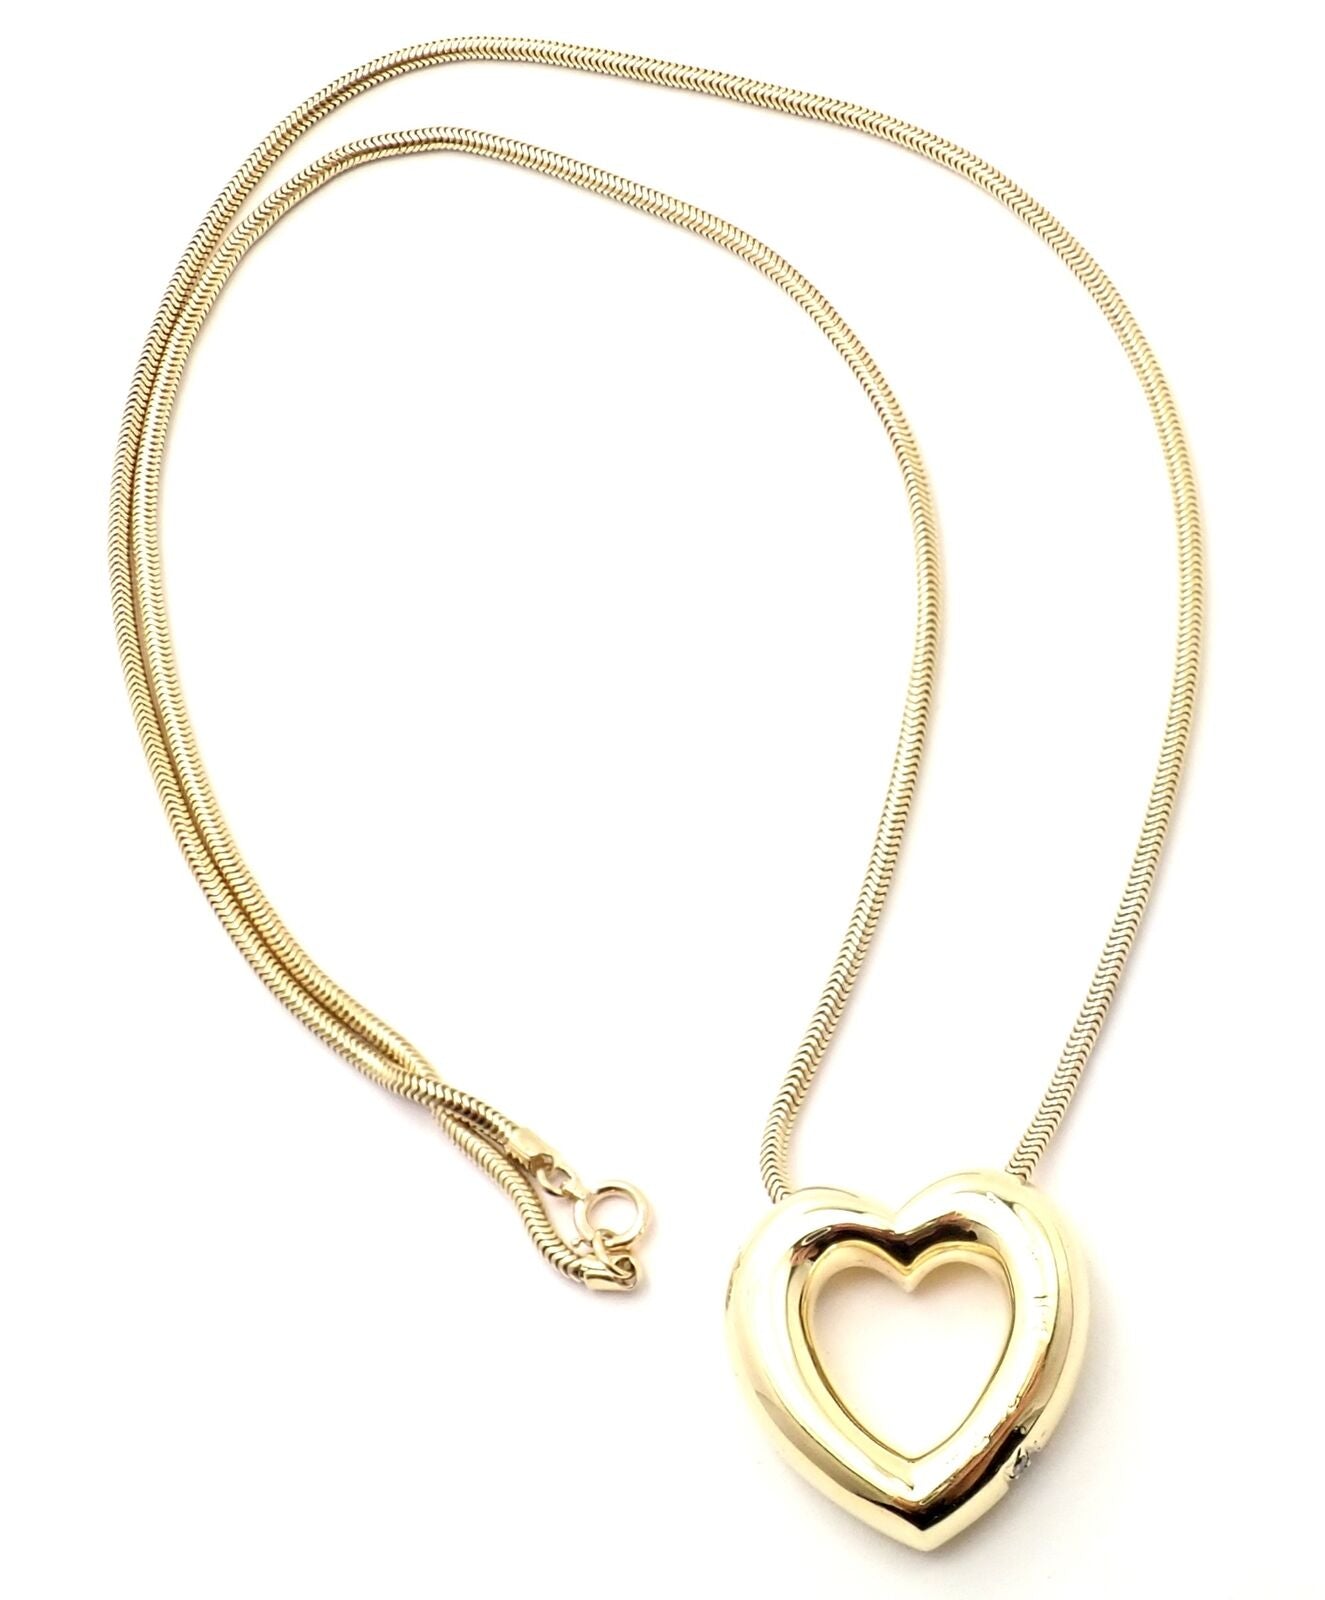 Tiffany & Co. Jewelry & Watches:Fine Jewelry:Necklaces & Pendants Authentic! Tiffany & Co Picasso 18k Yellow Gold Diamond Heart Pendant Necklace